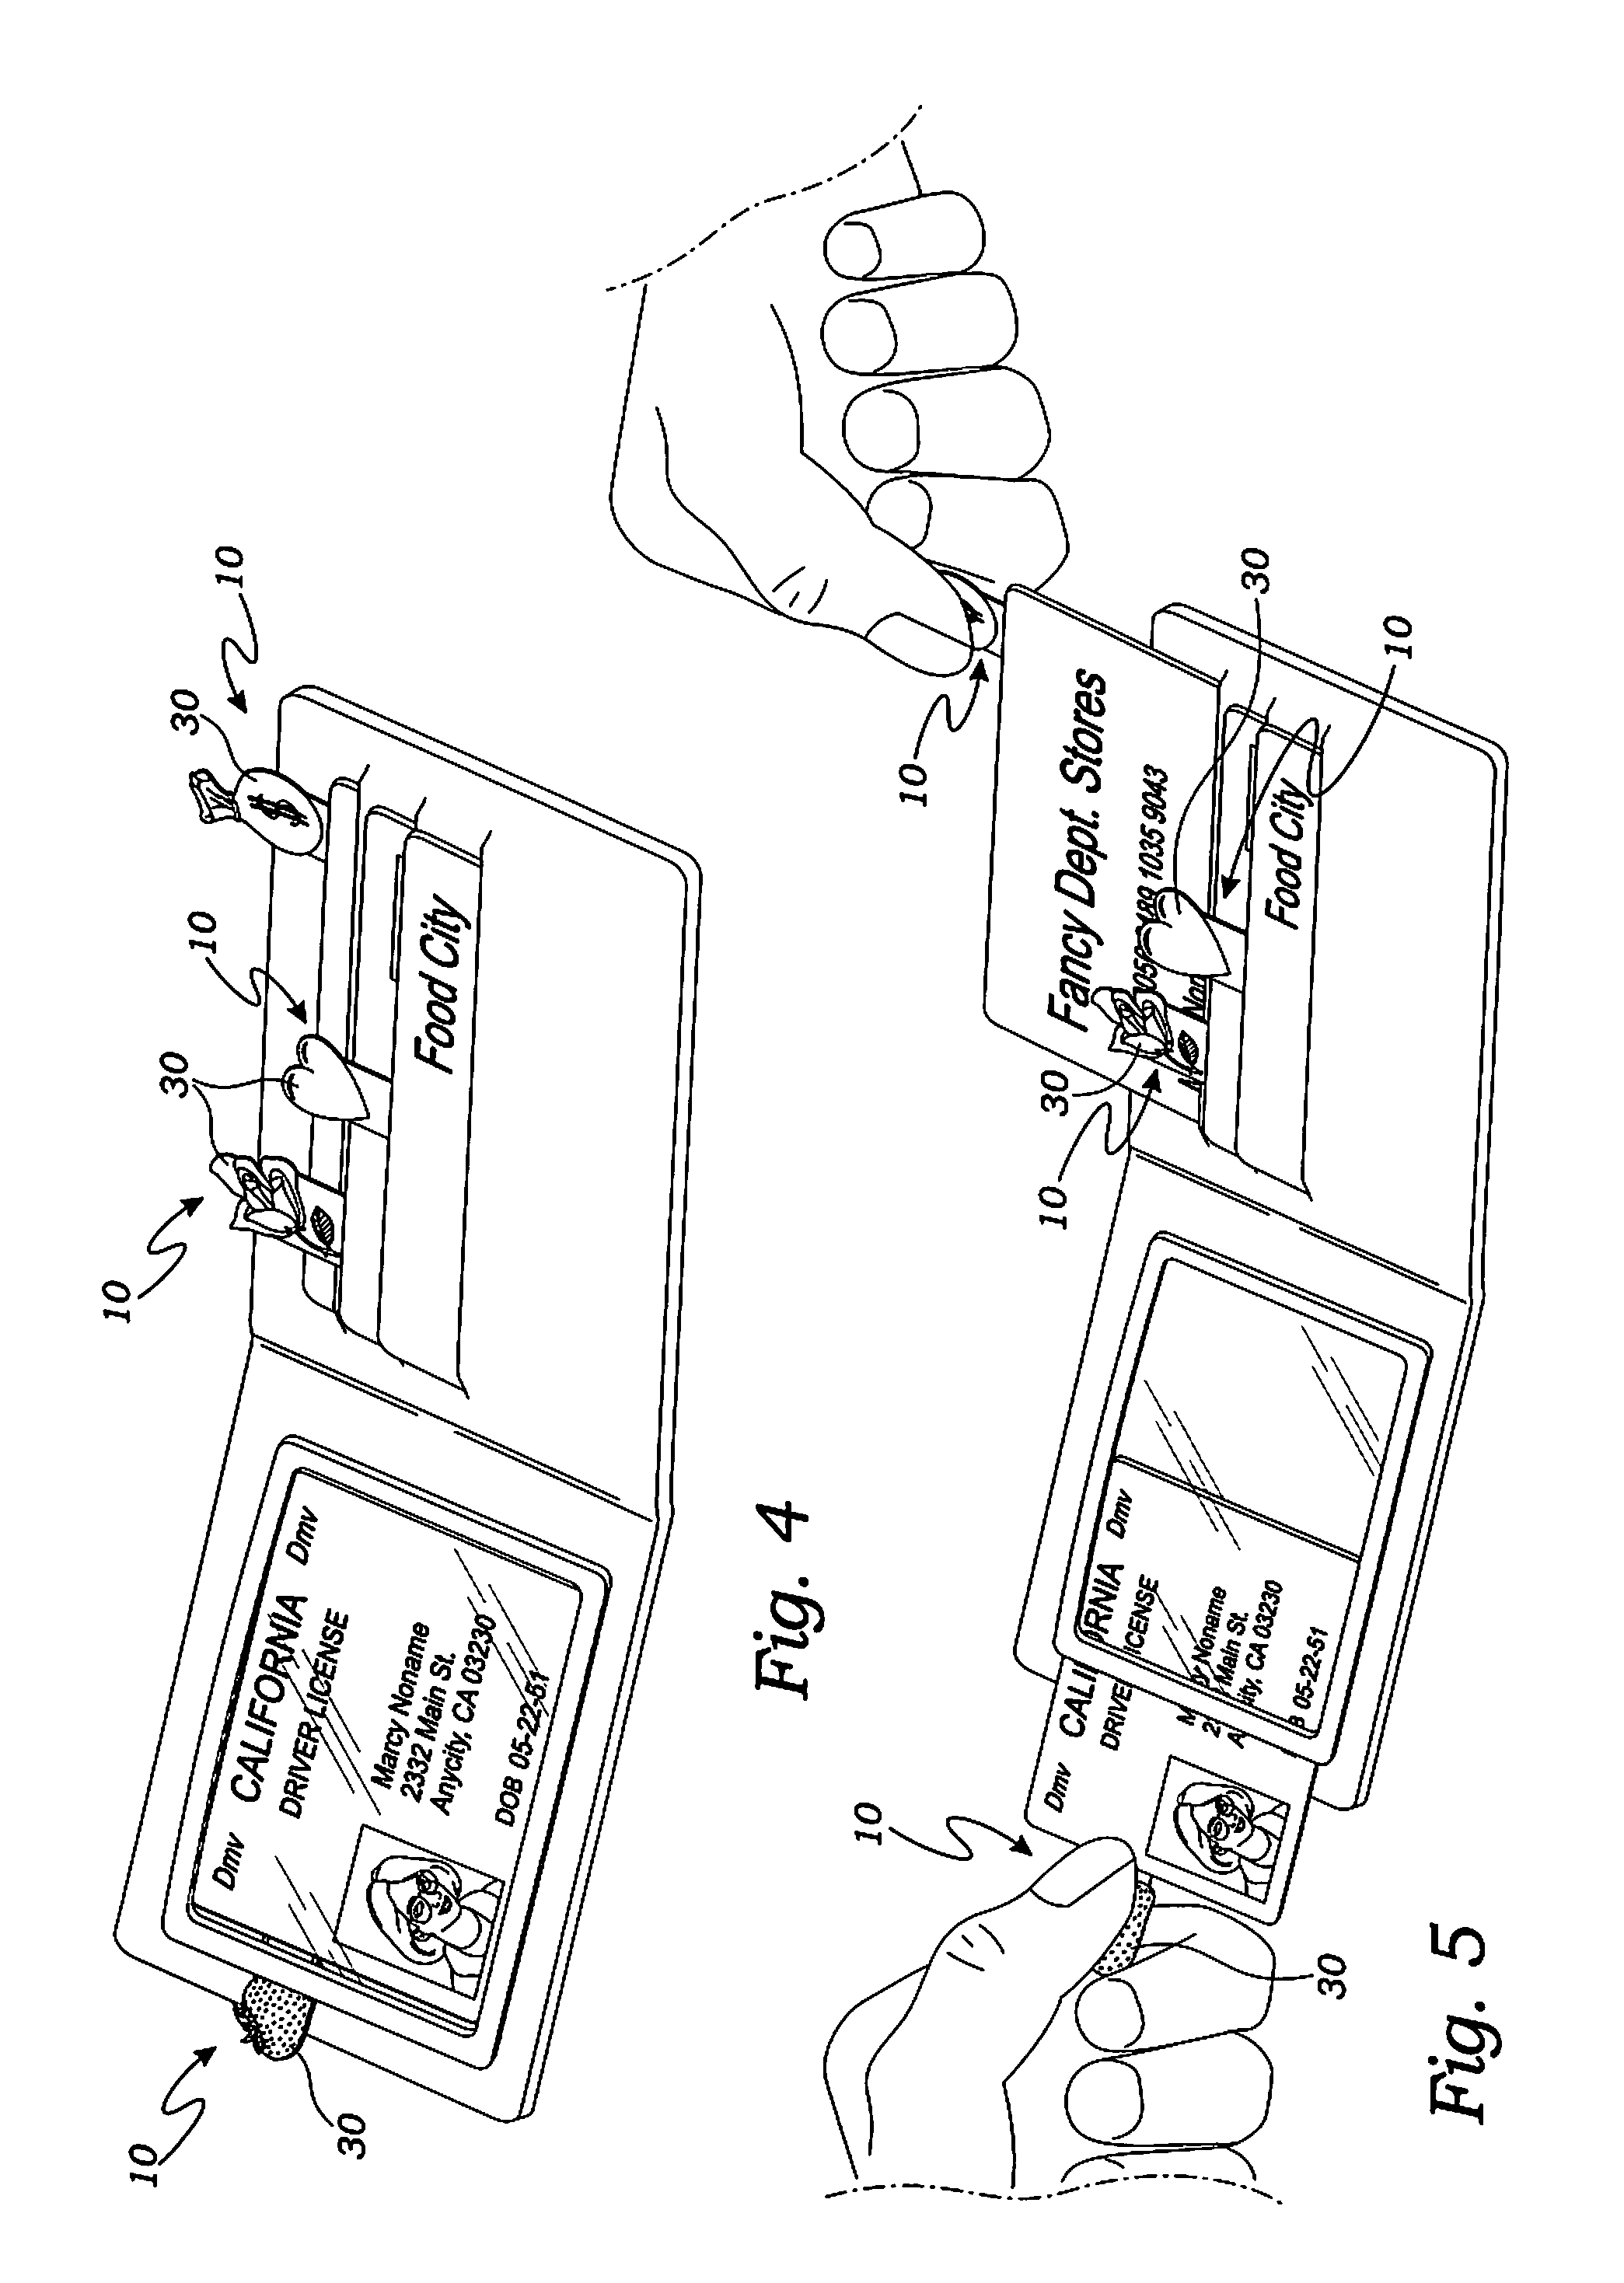 Apparatus and method for assisting the retrieval of identification or credit cards from a wallet